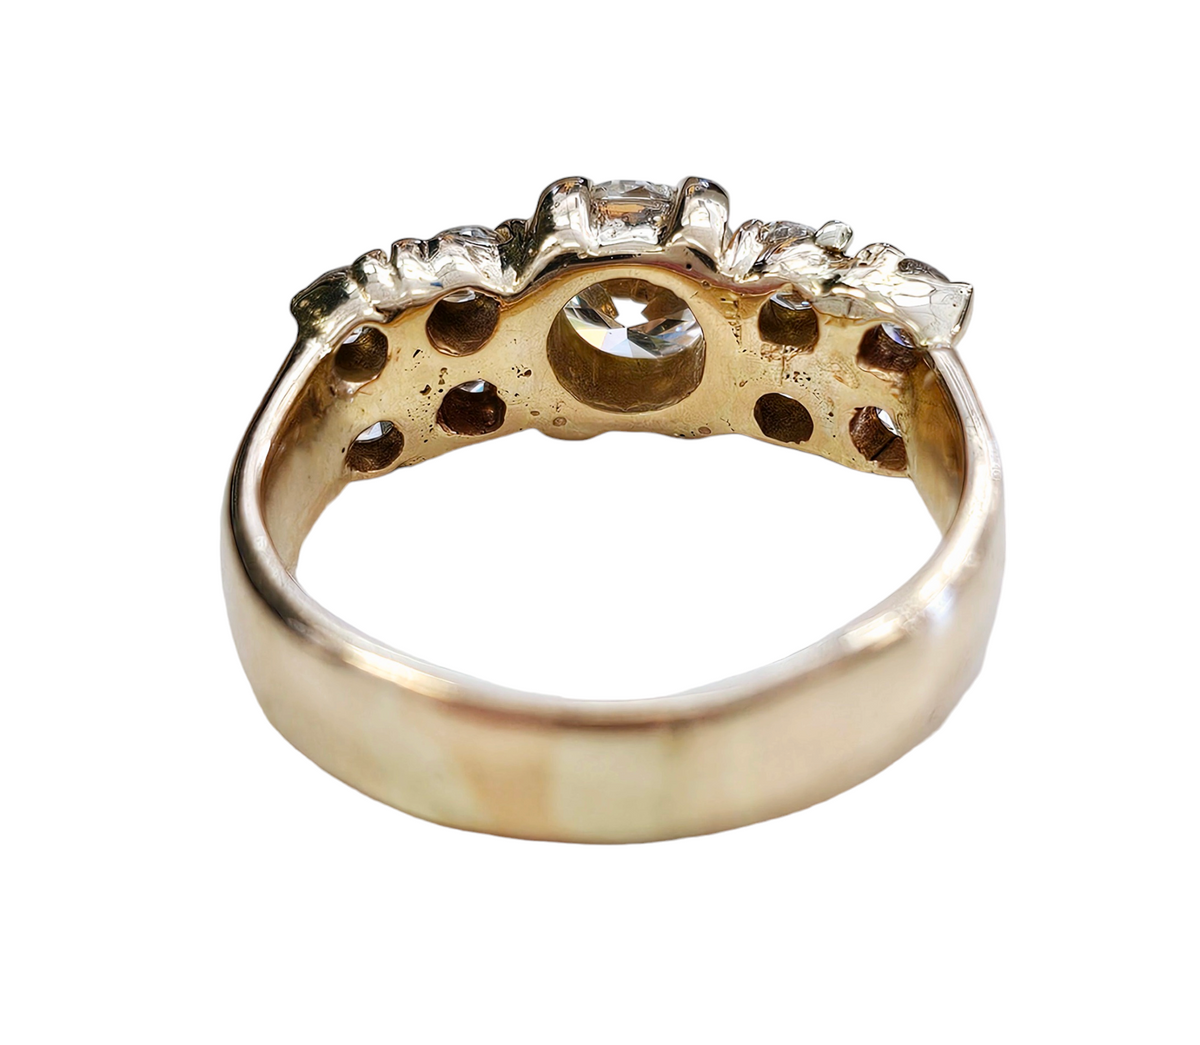 Diamond Engagement Ring with Side Diamonds made in 14-Karat Yellow Gold